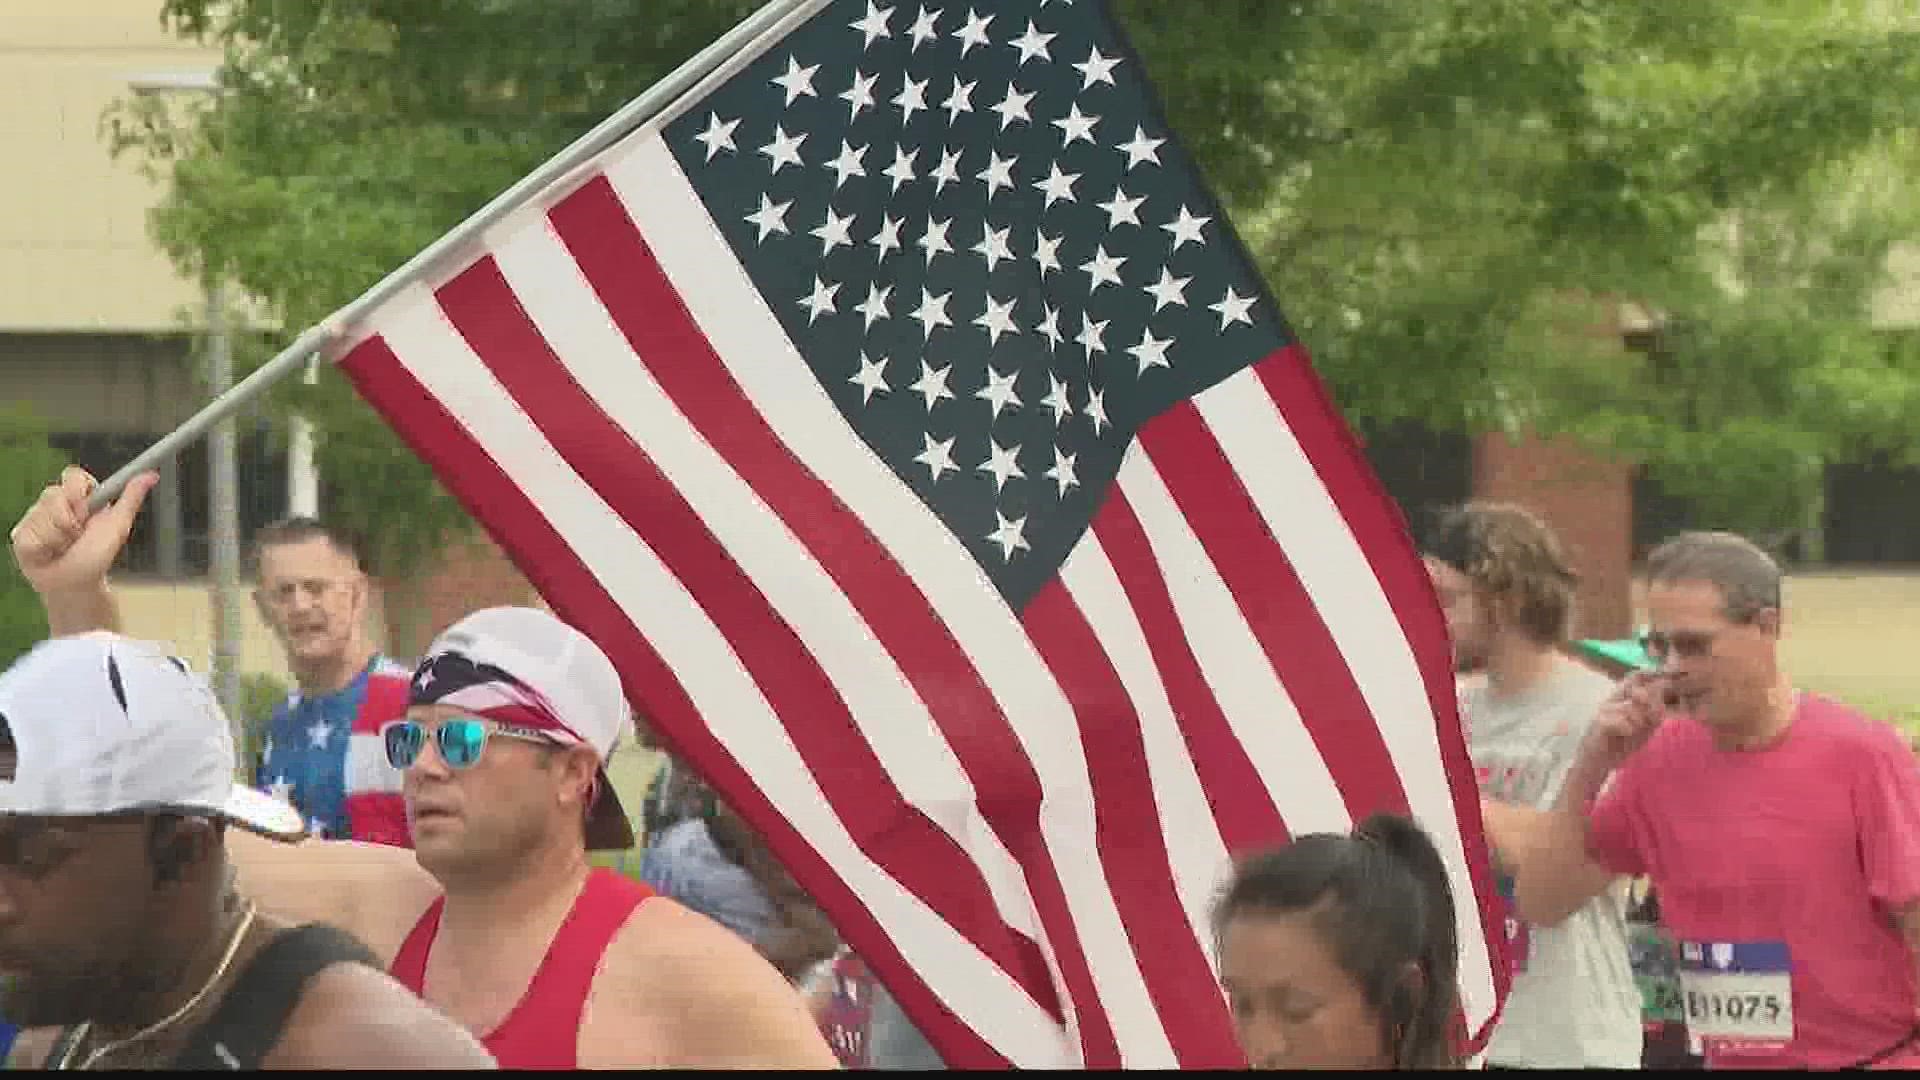 Another Fourth of July with a successful running of the AJC Peachtree Road Race!